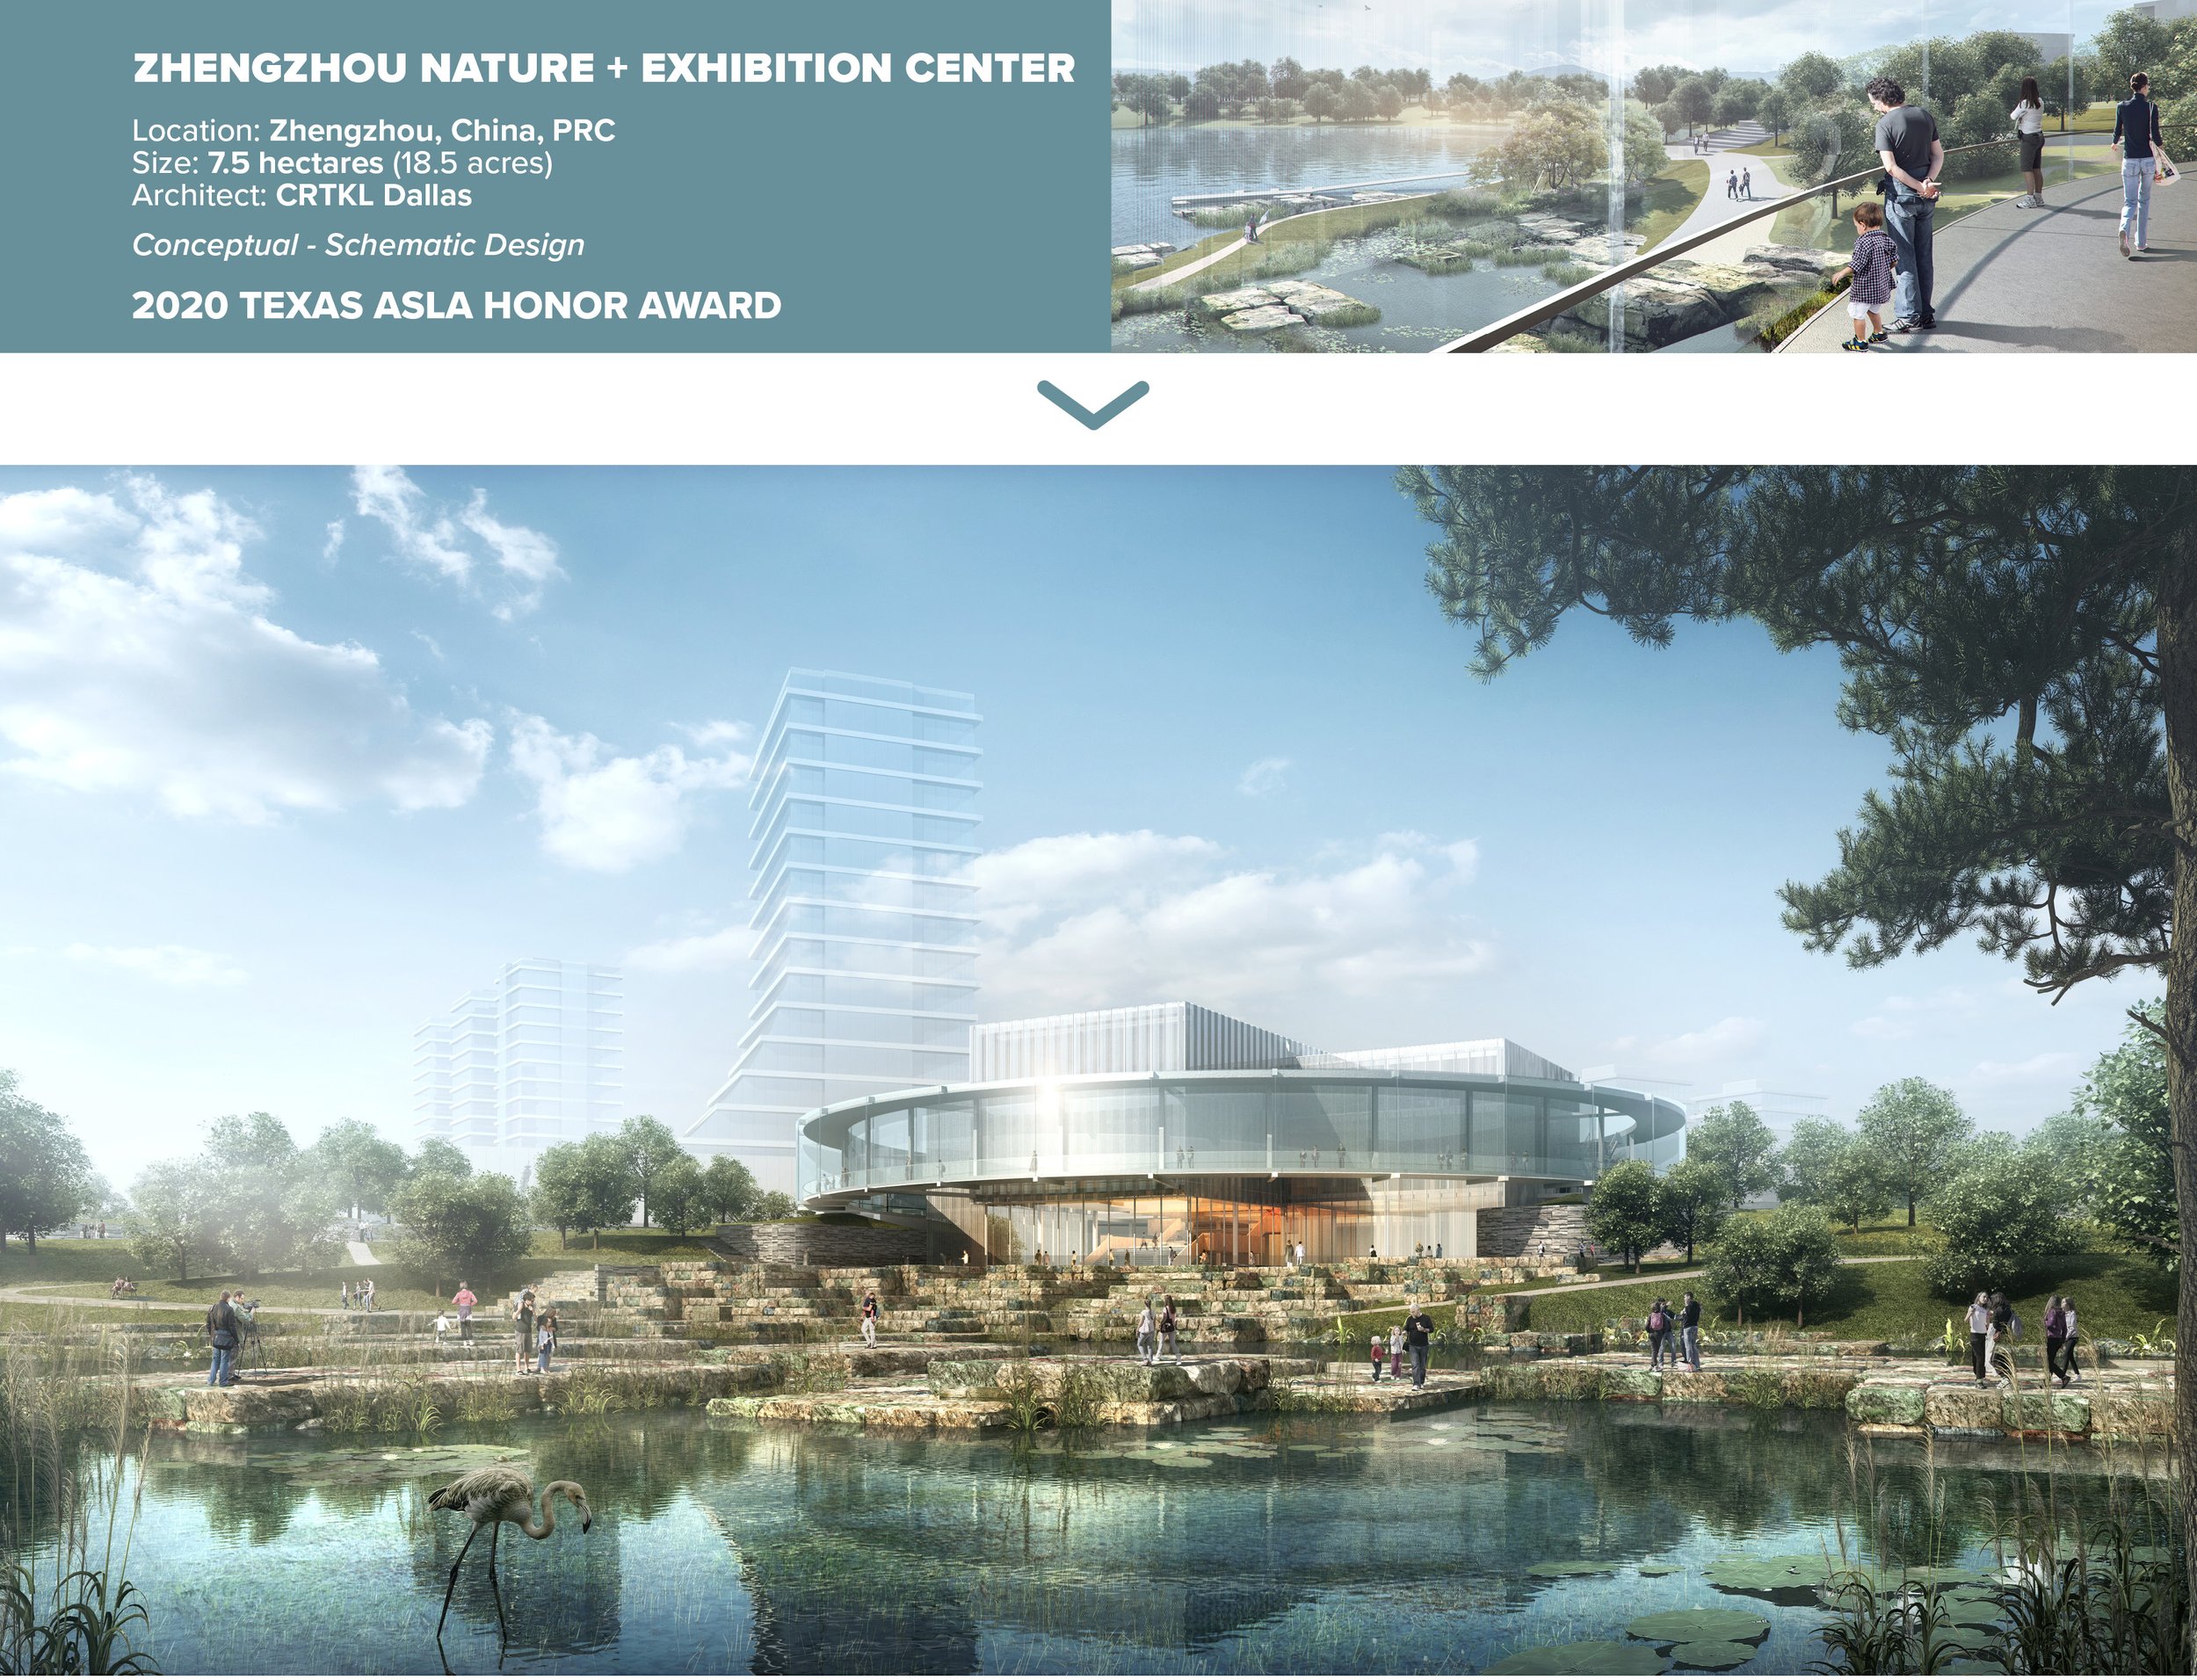         The Zhengzhou Nature and Exhibition Center will be a cultural and recreational amenity for a rapidly urbanizing new part of the city.  In response to the project siting along a planned reservoir and the context of the newly developed city nei